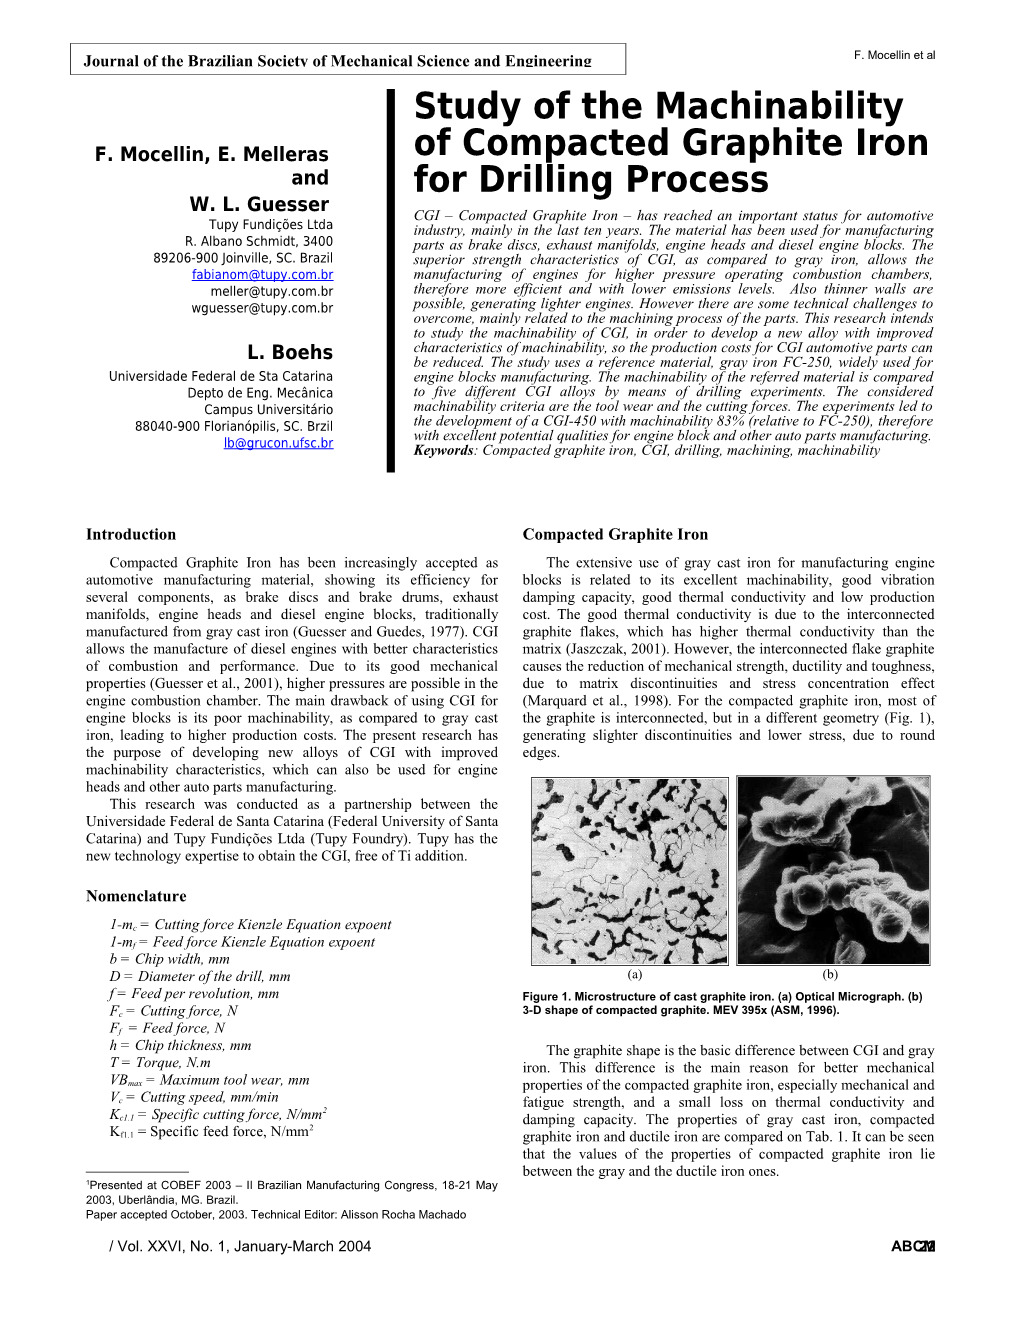 Study of the Machinability of Compacted Graphite Iron for Drilling Process